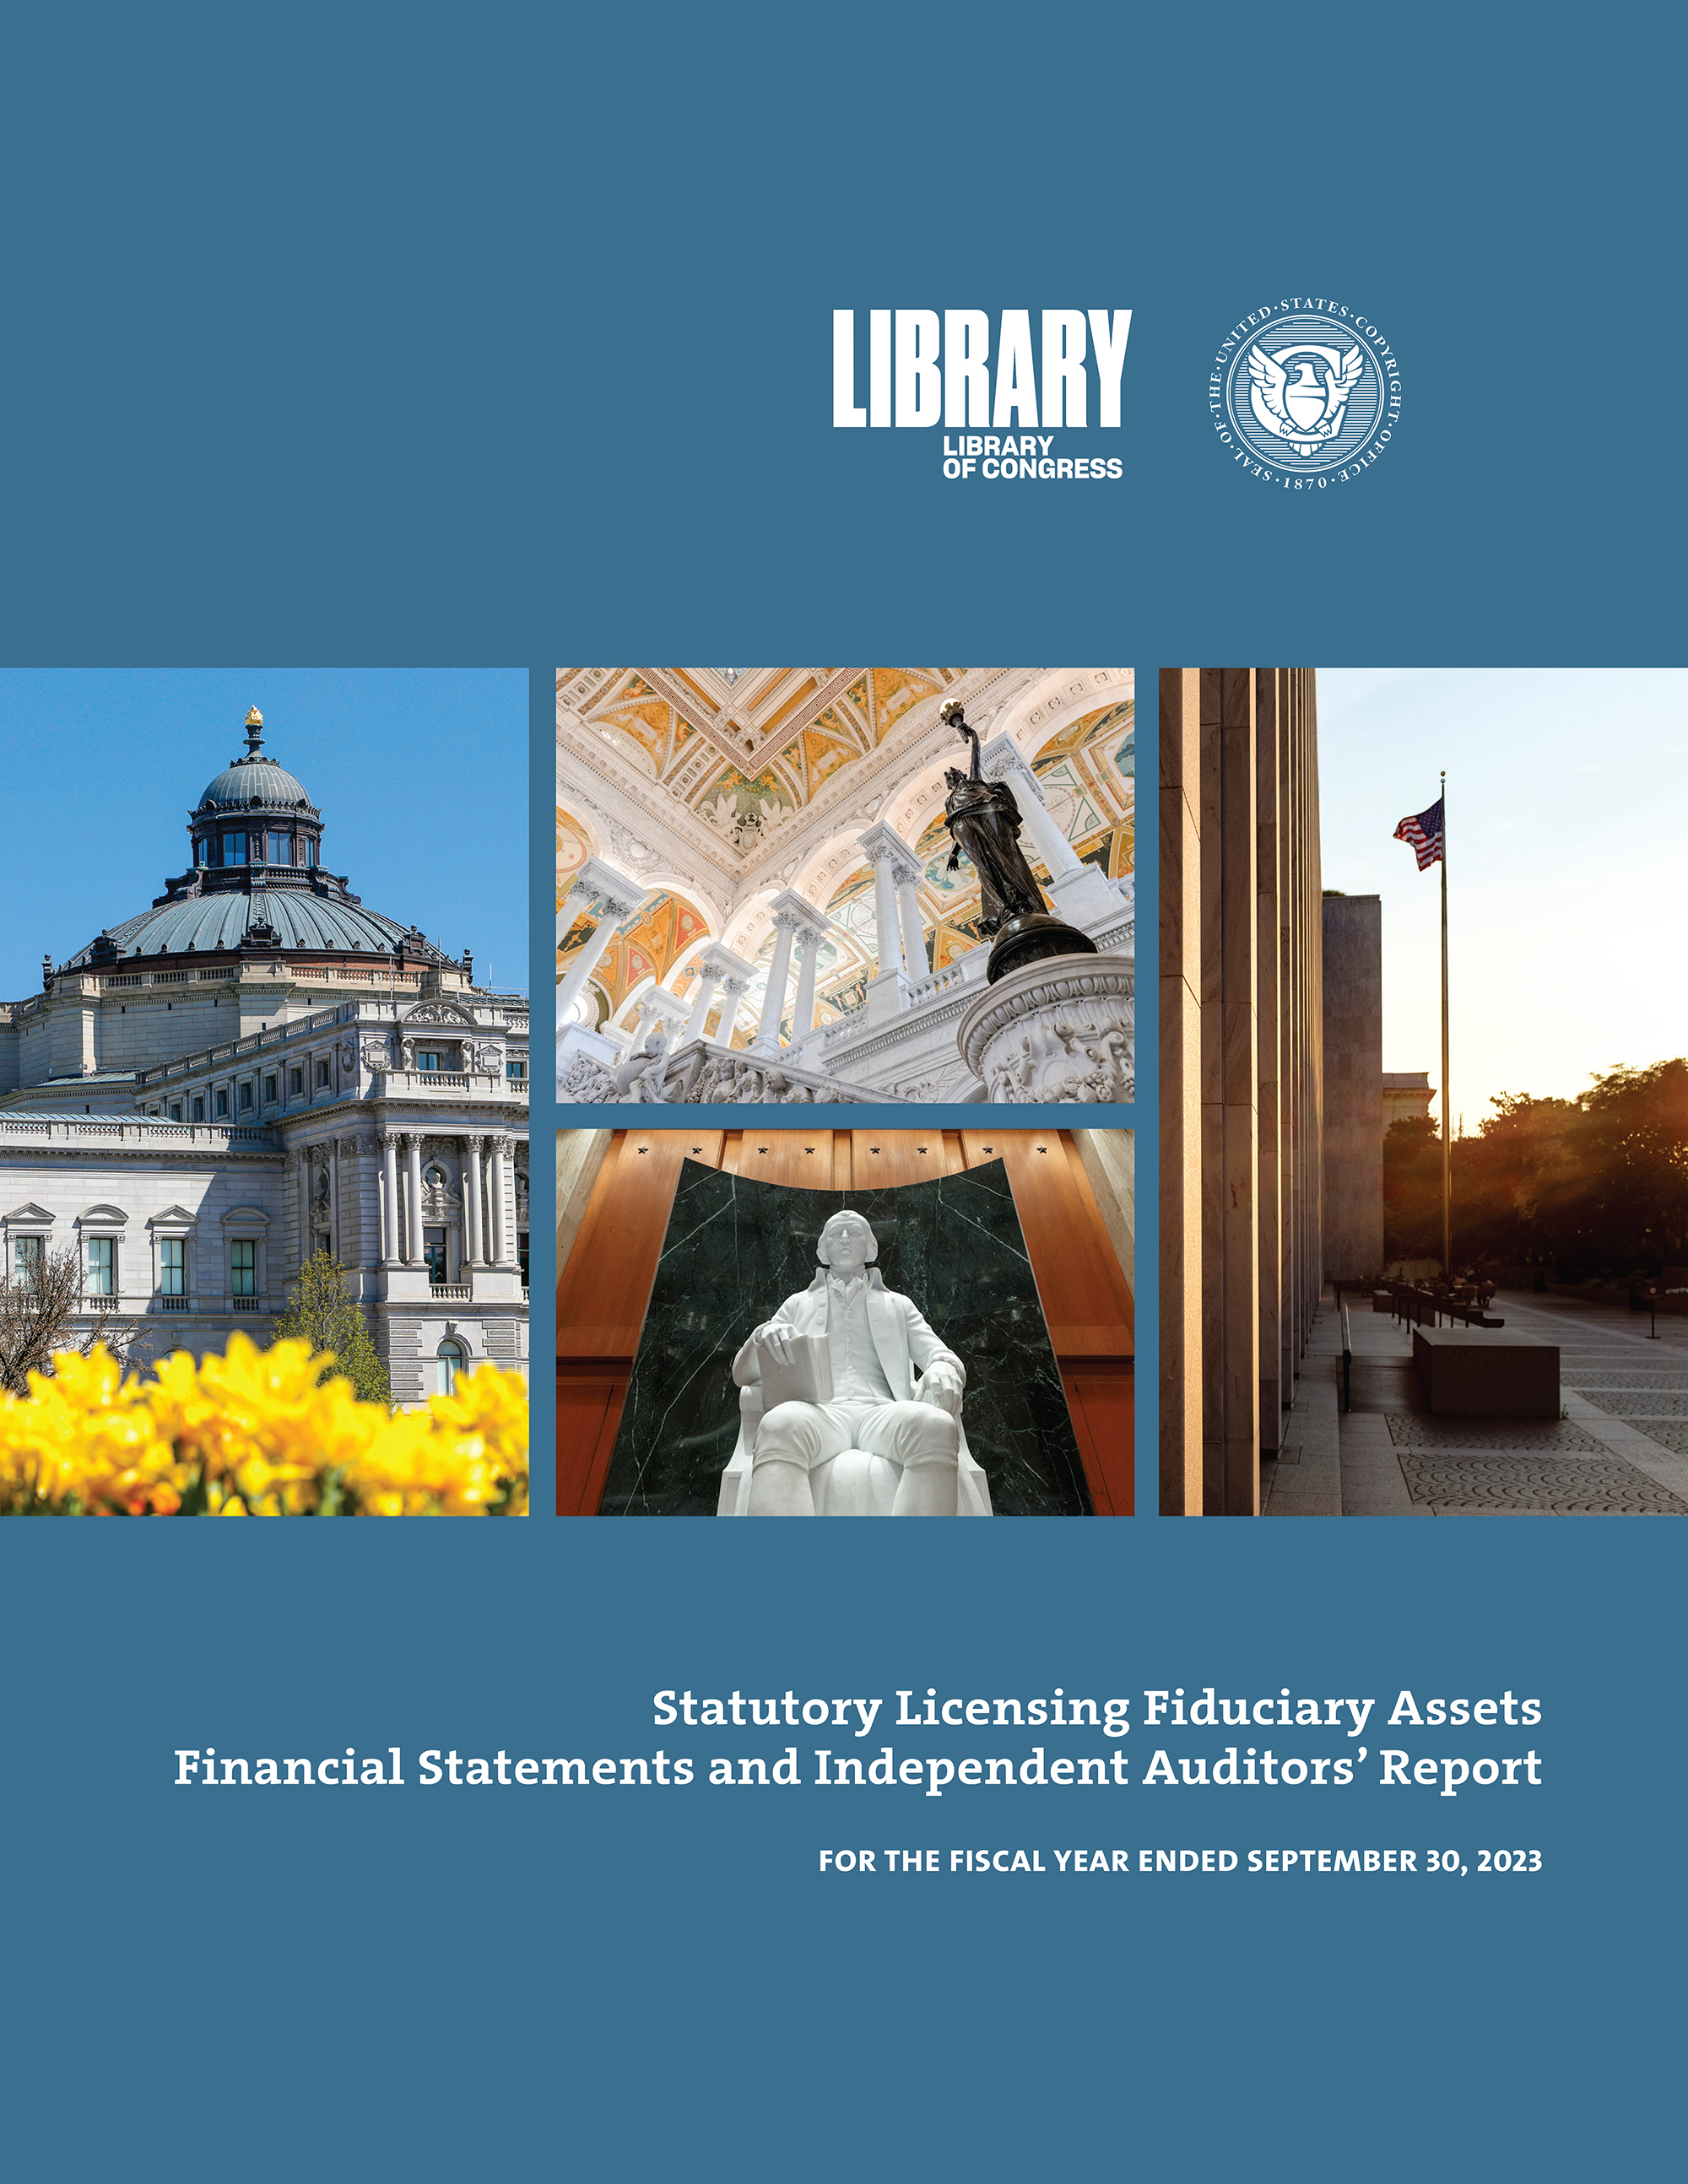 Statutory Licensing Fiduciary Assets Audited Financial Statements Report cover